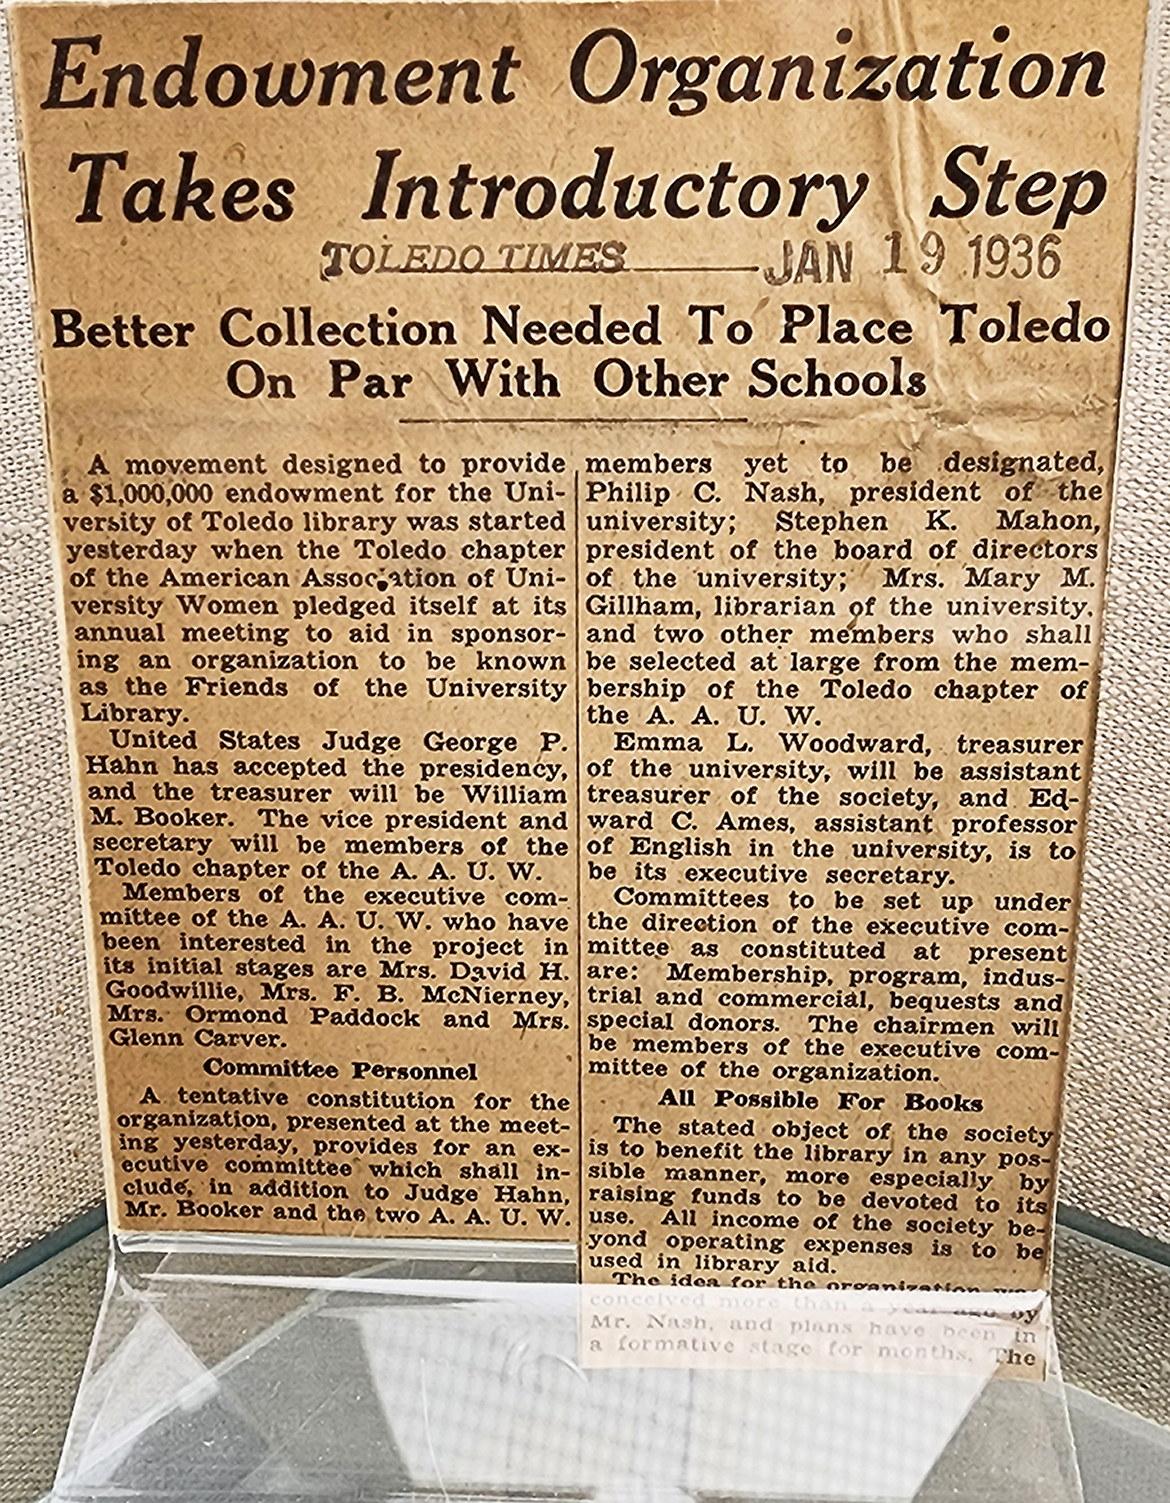 Endowment Organization Takes Introductory Step. Toledo Times article, January 19, 1936